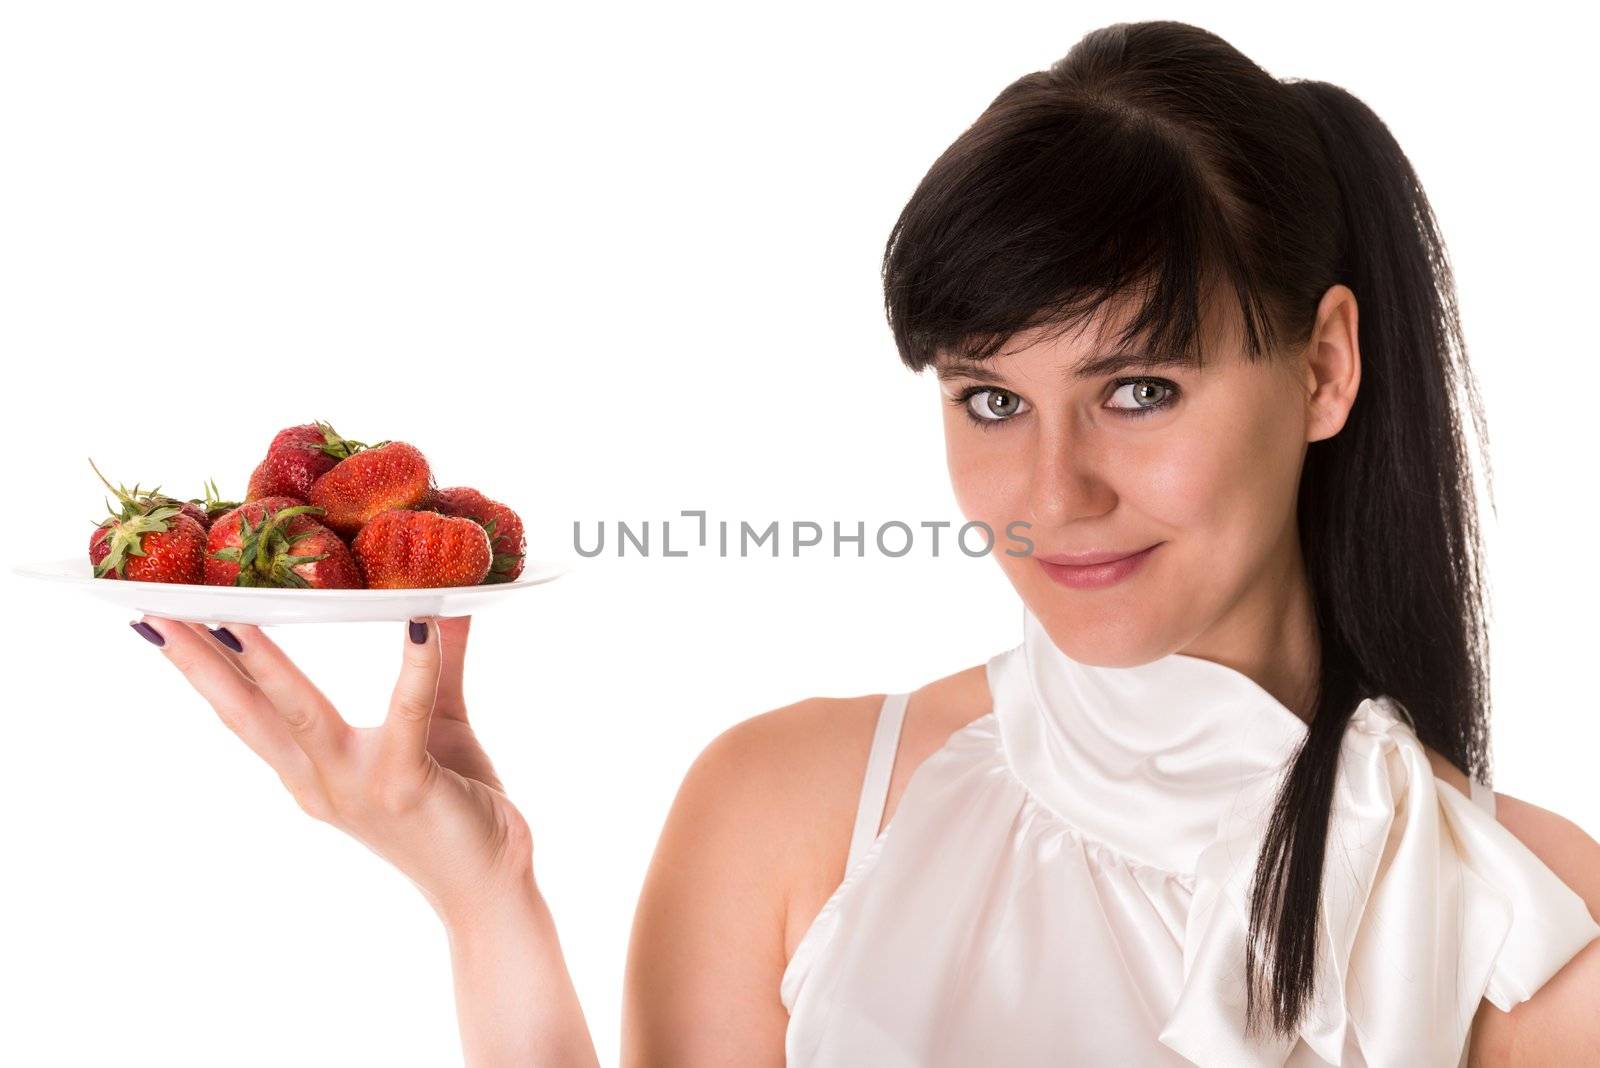 Playful young woman with strawberries on plate